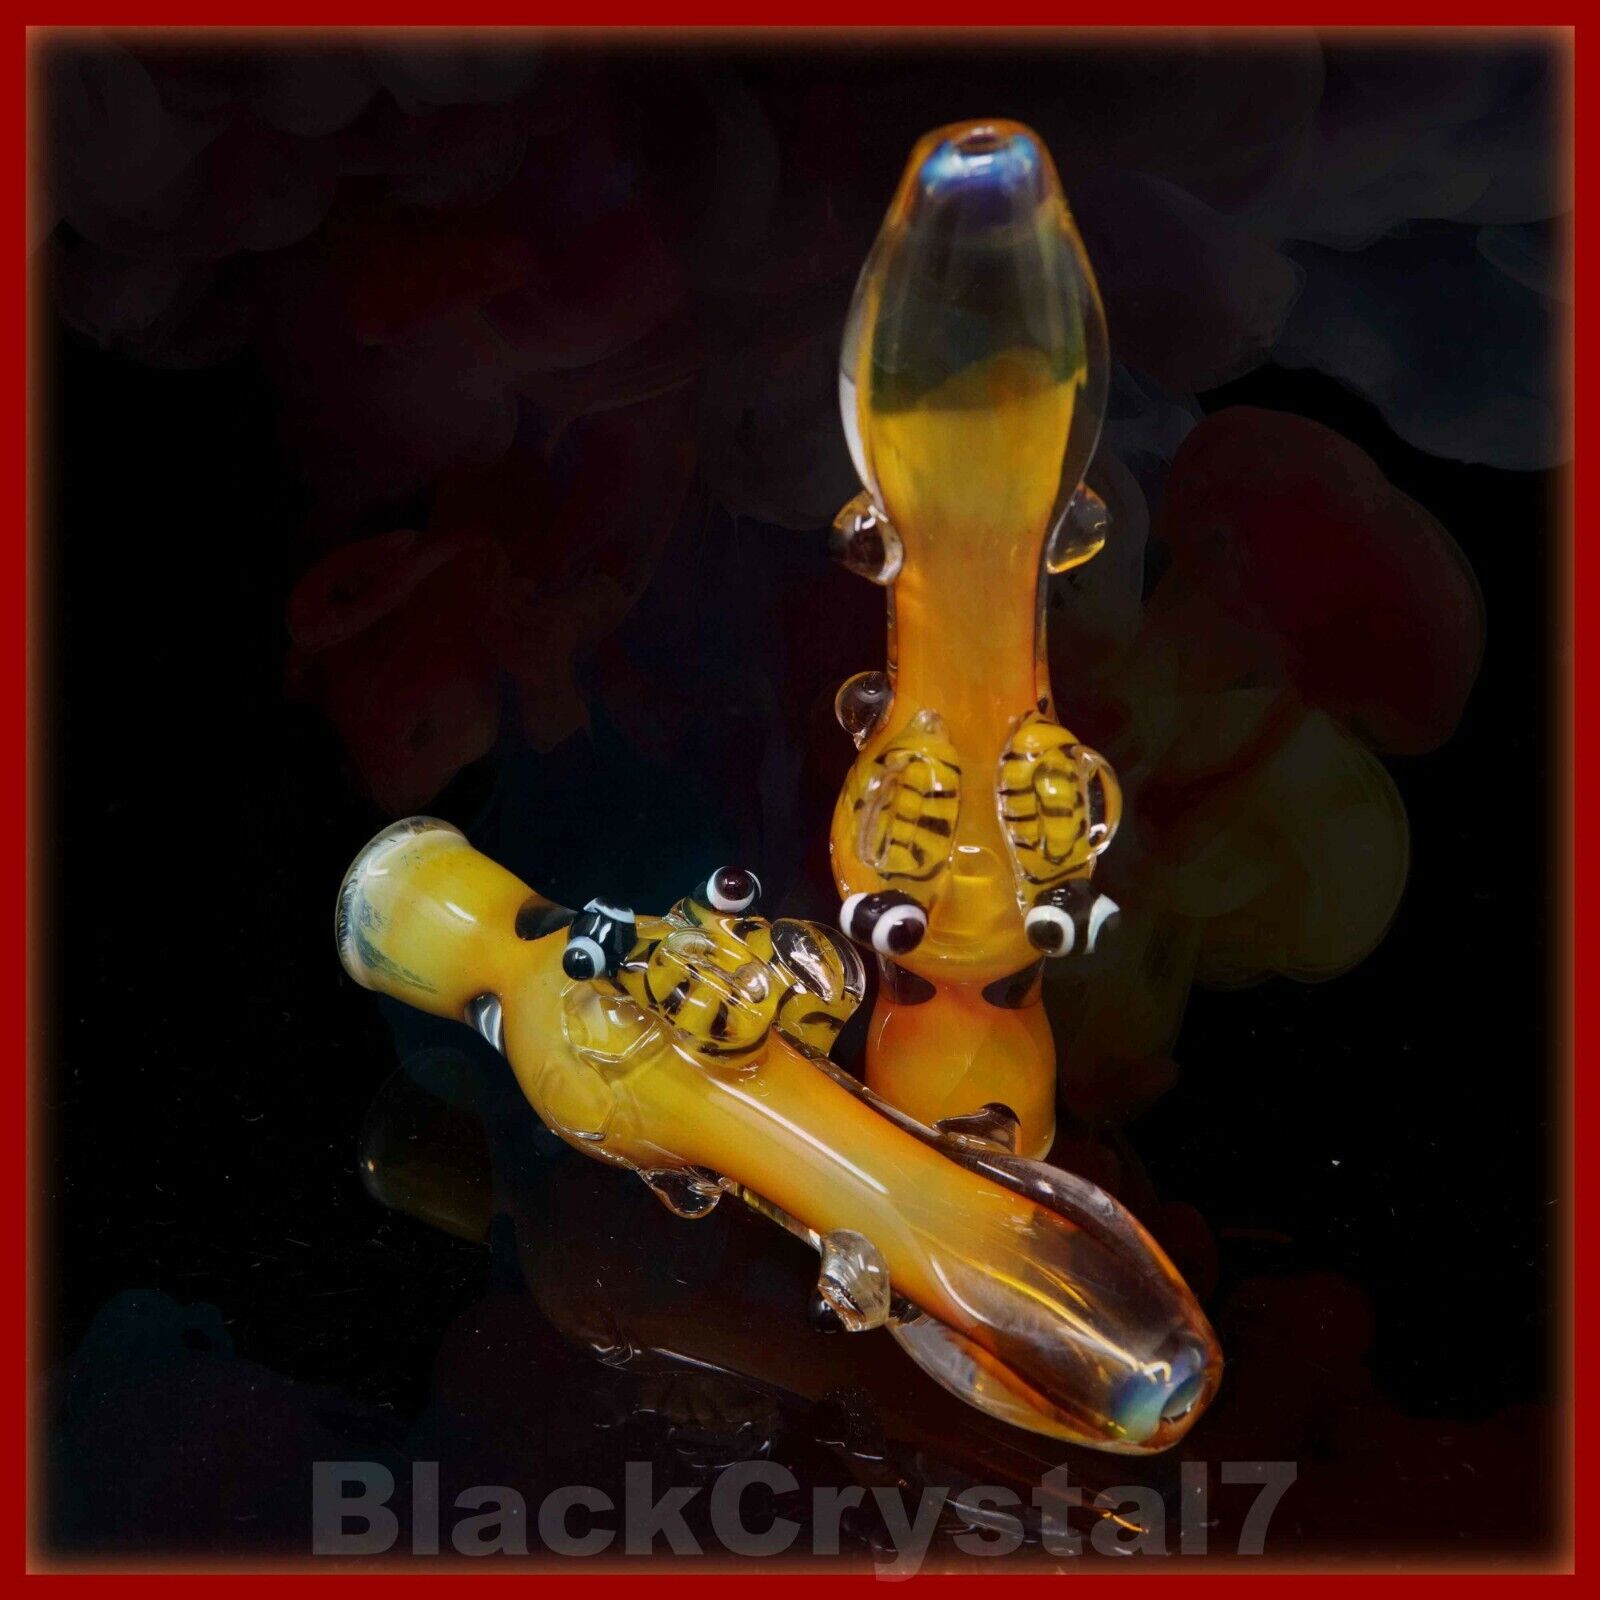 4 in Handmade Golden Bumble Bee Tobacco Smoking Bowl Glass Pipes - US Seller